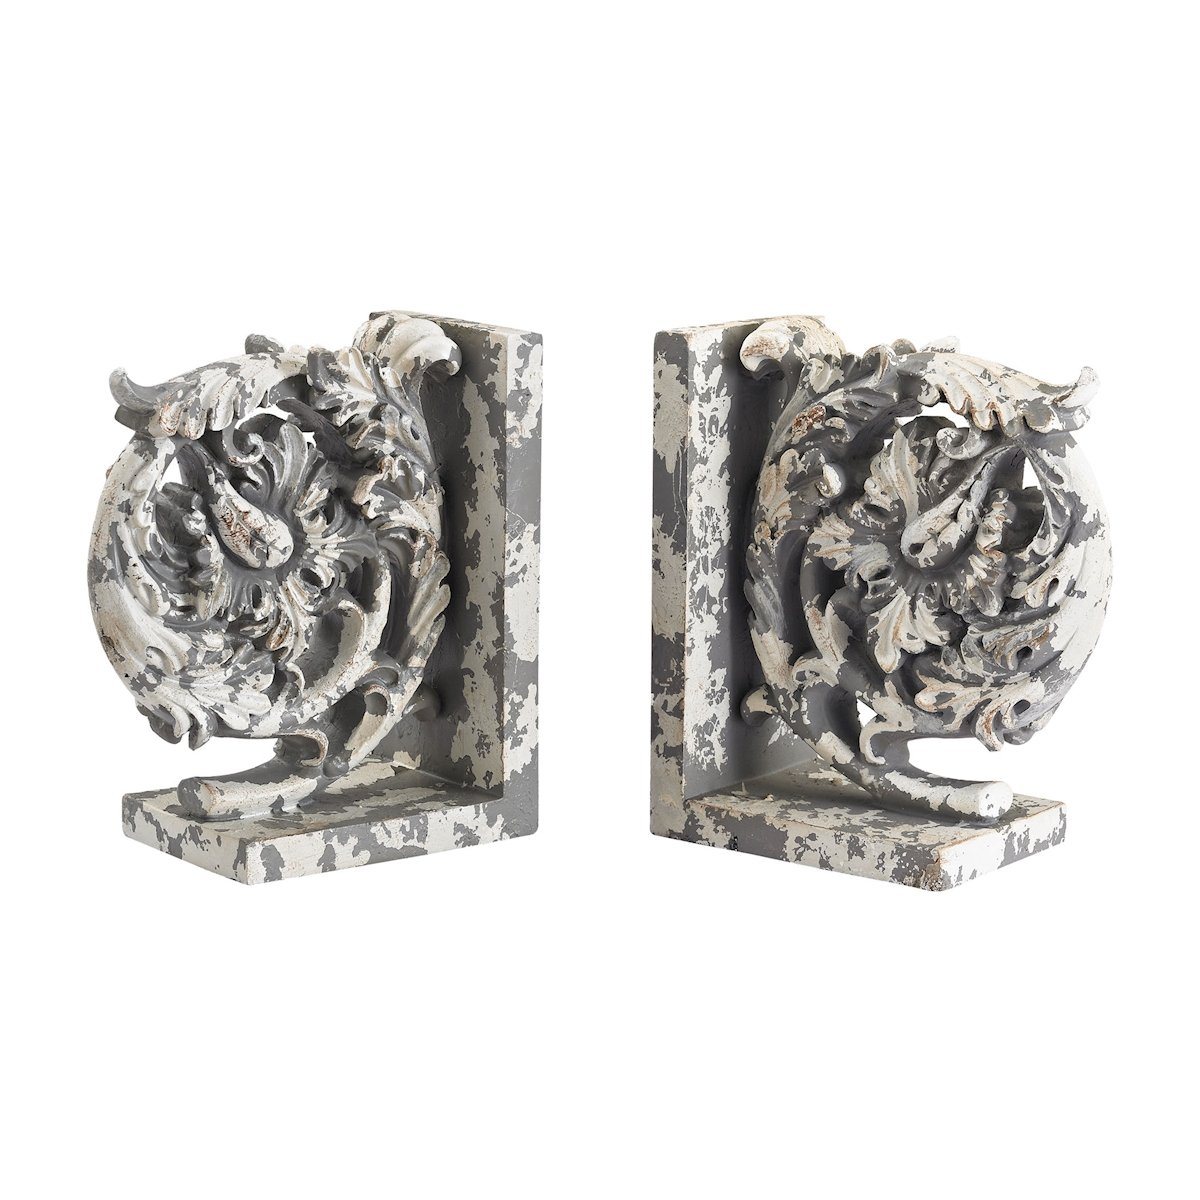 Aged Plaster Scroll Bookends ACCESSORIES Sterling 